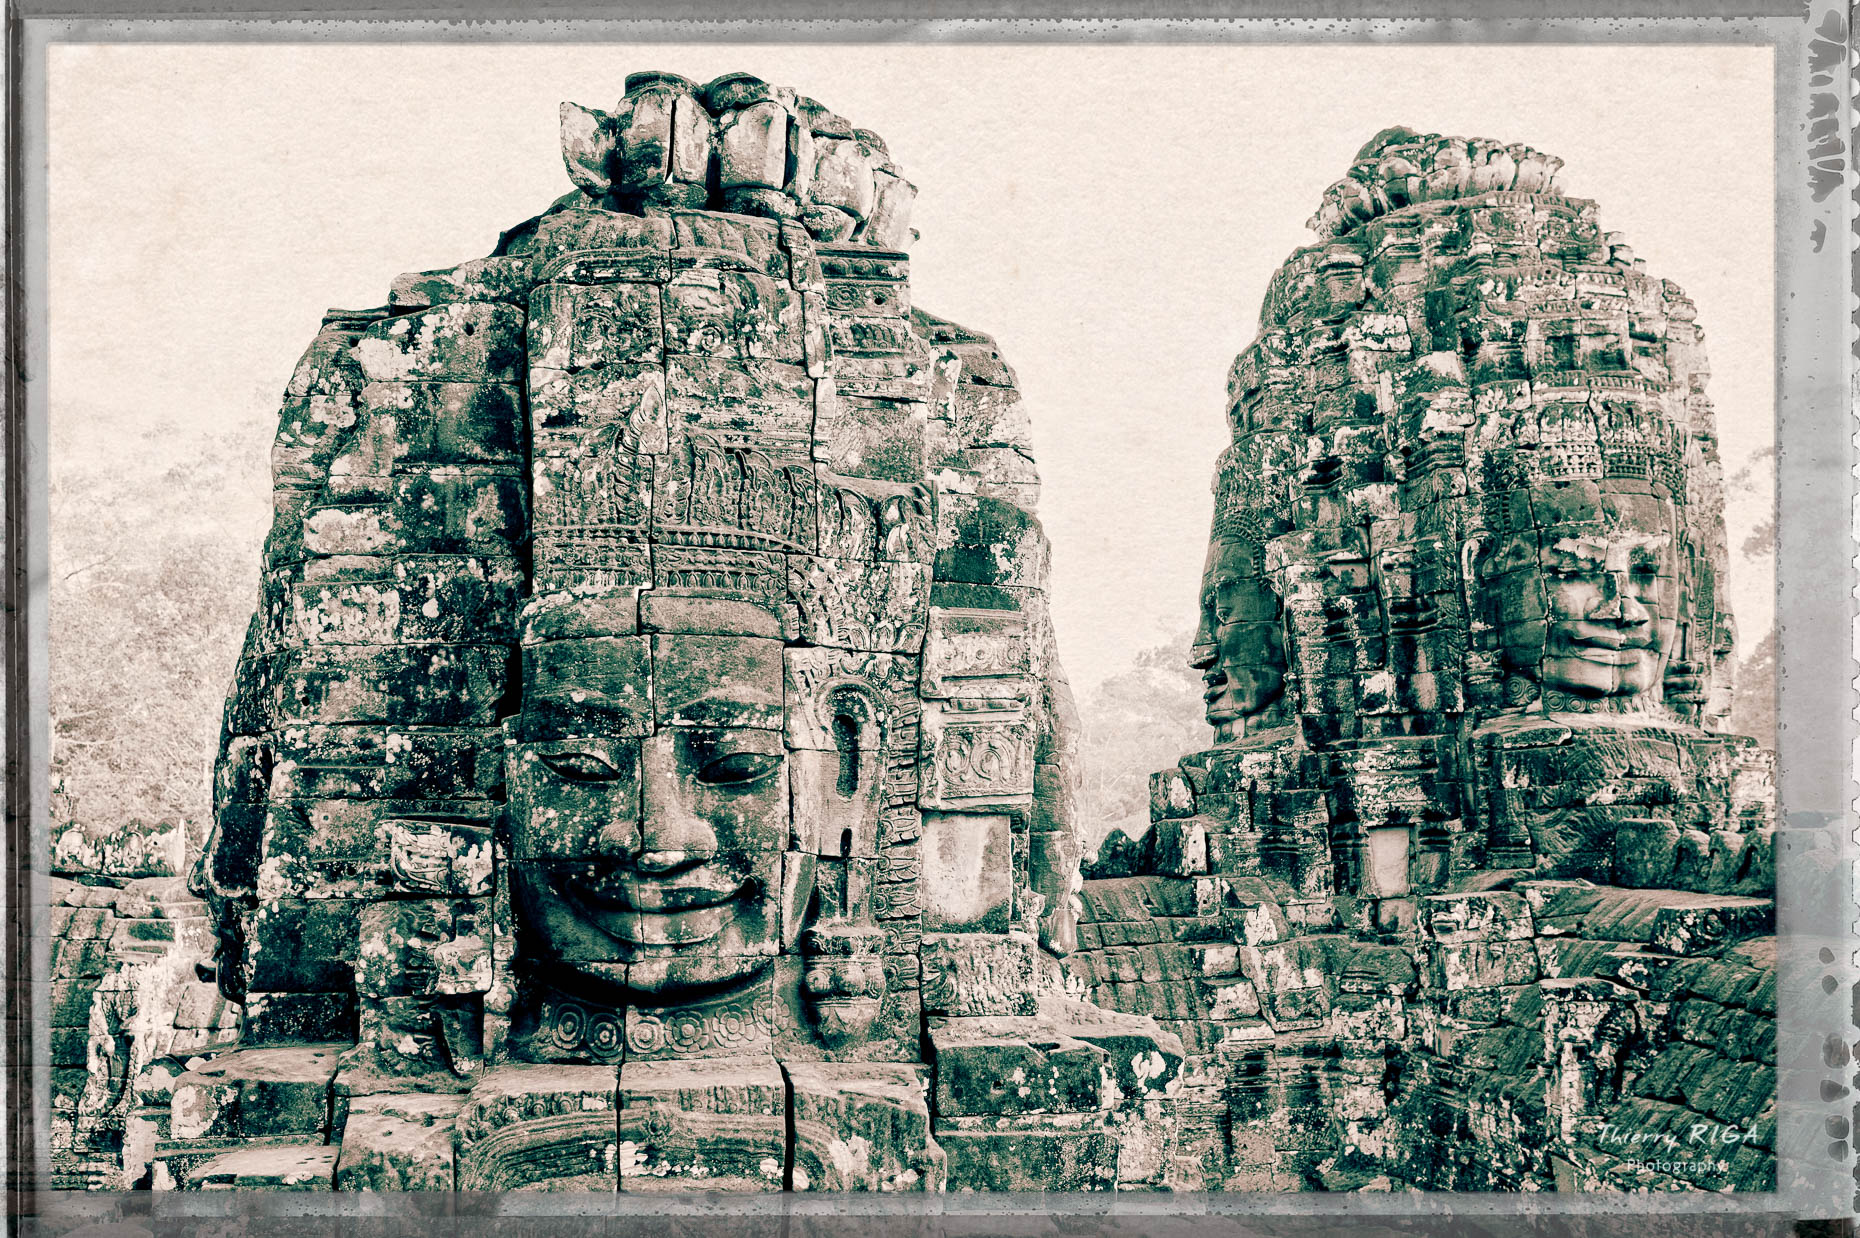 face towers of the Bayon Temple, Thierry Riga, Angkor Photography